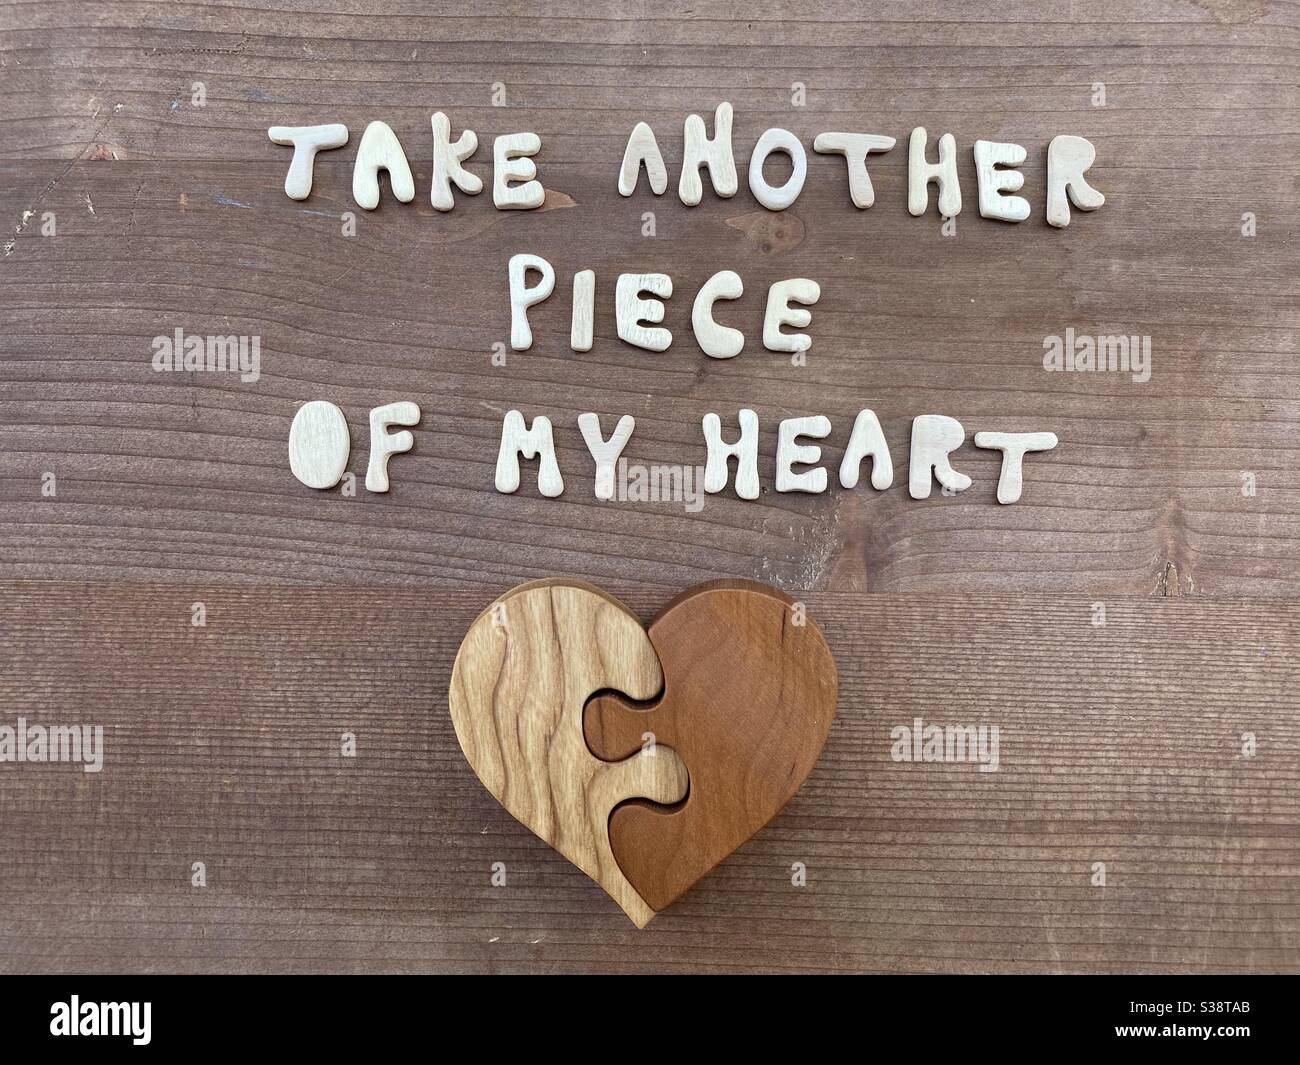 Take another piece of my heart, love message composed with handmade wooden letters and a wooden heart puzzle Stock Photo